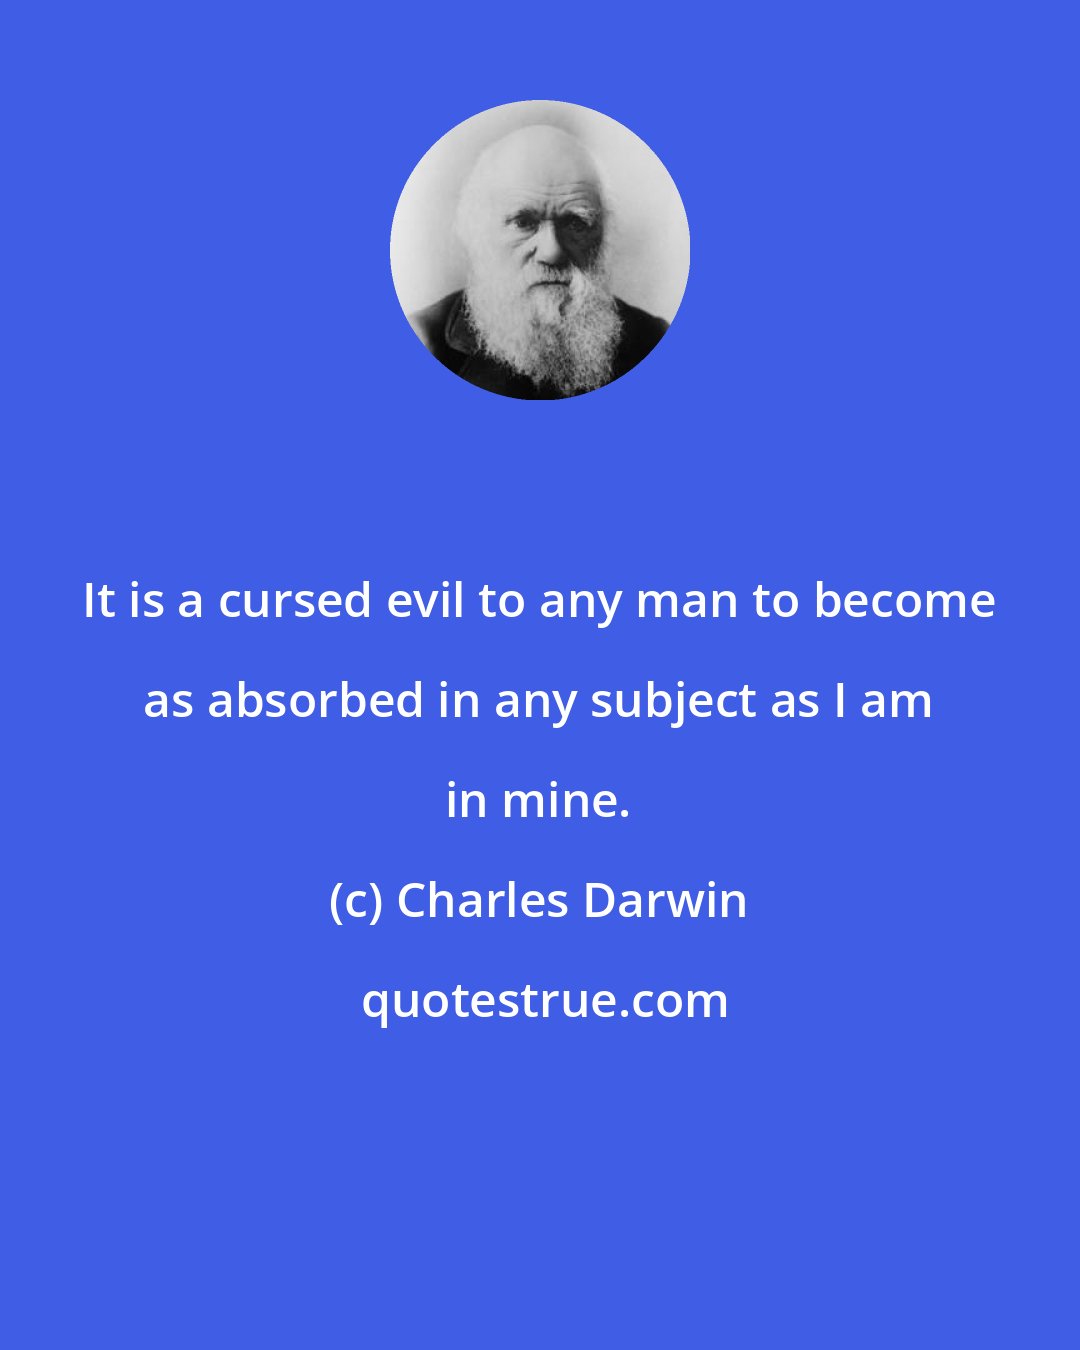 Charles Darwin: It is a cursed evil to any man to become as absorbed in any subject as I am in mine.